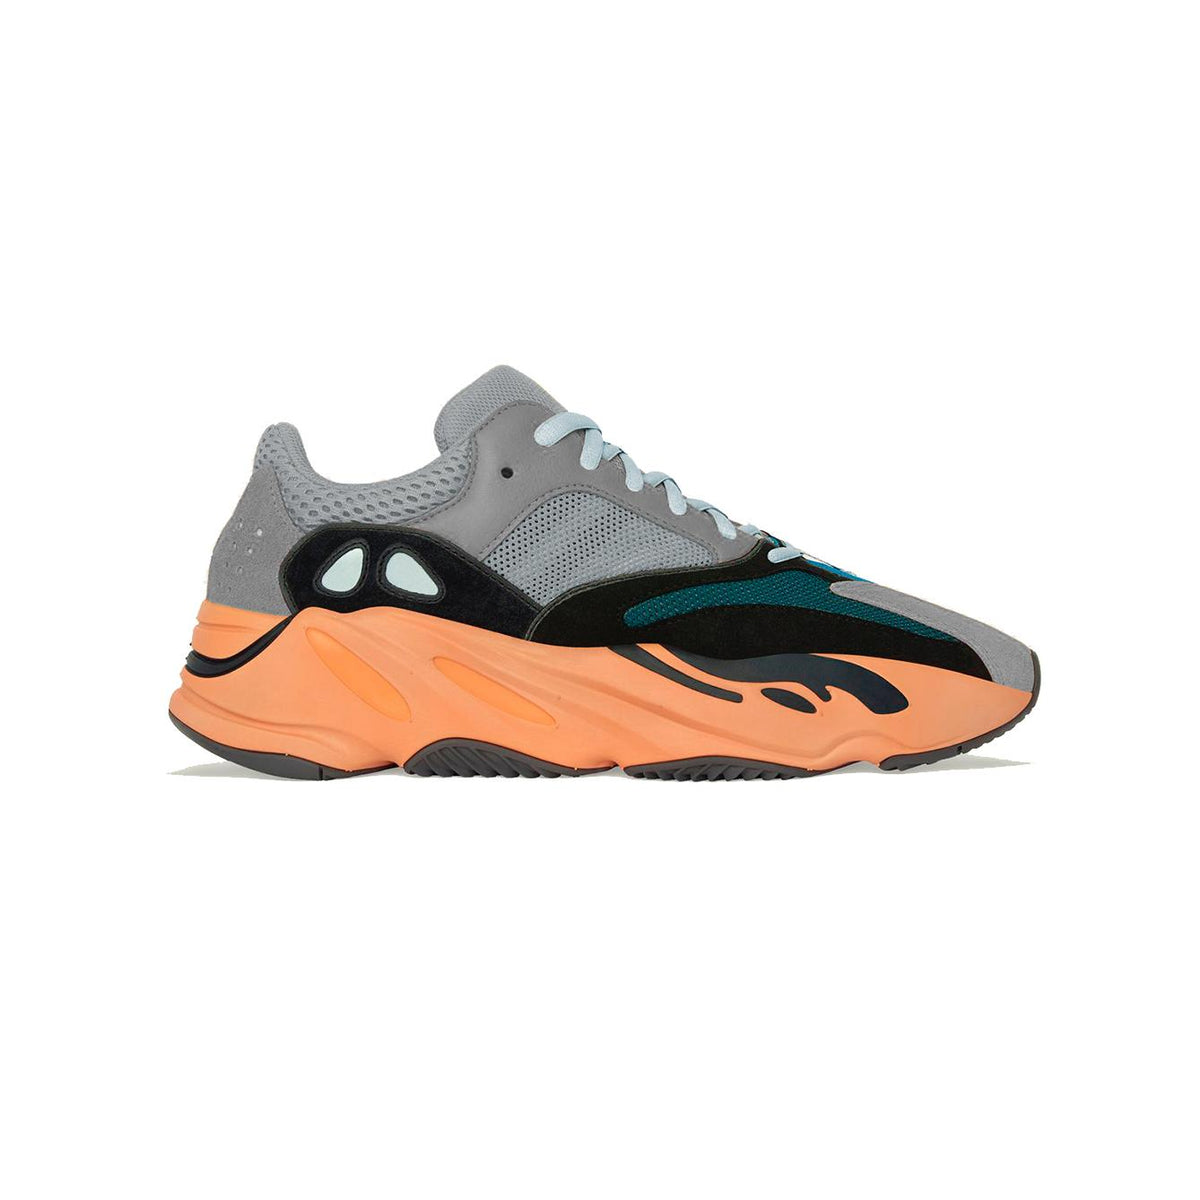 Yeezy Boost 700 'Wash Orange' Set to release this month?